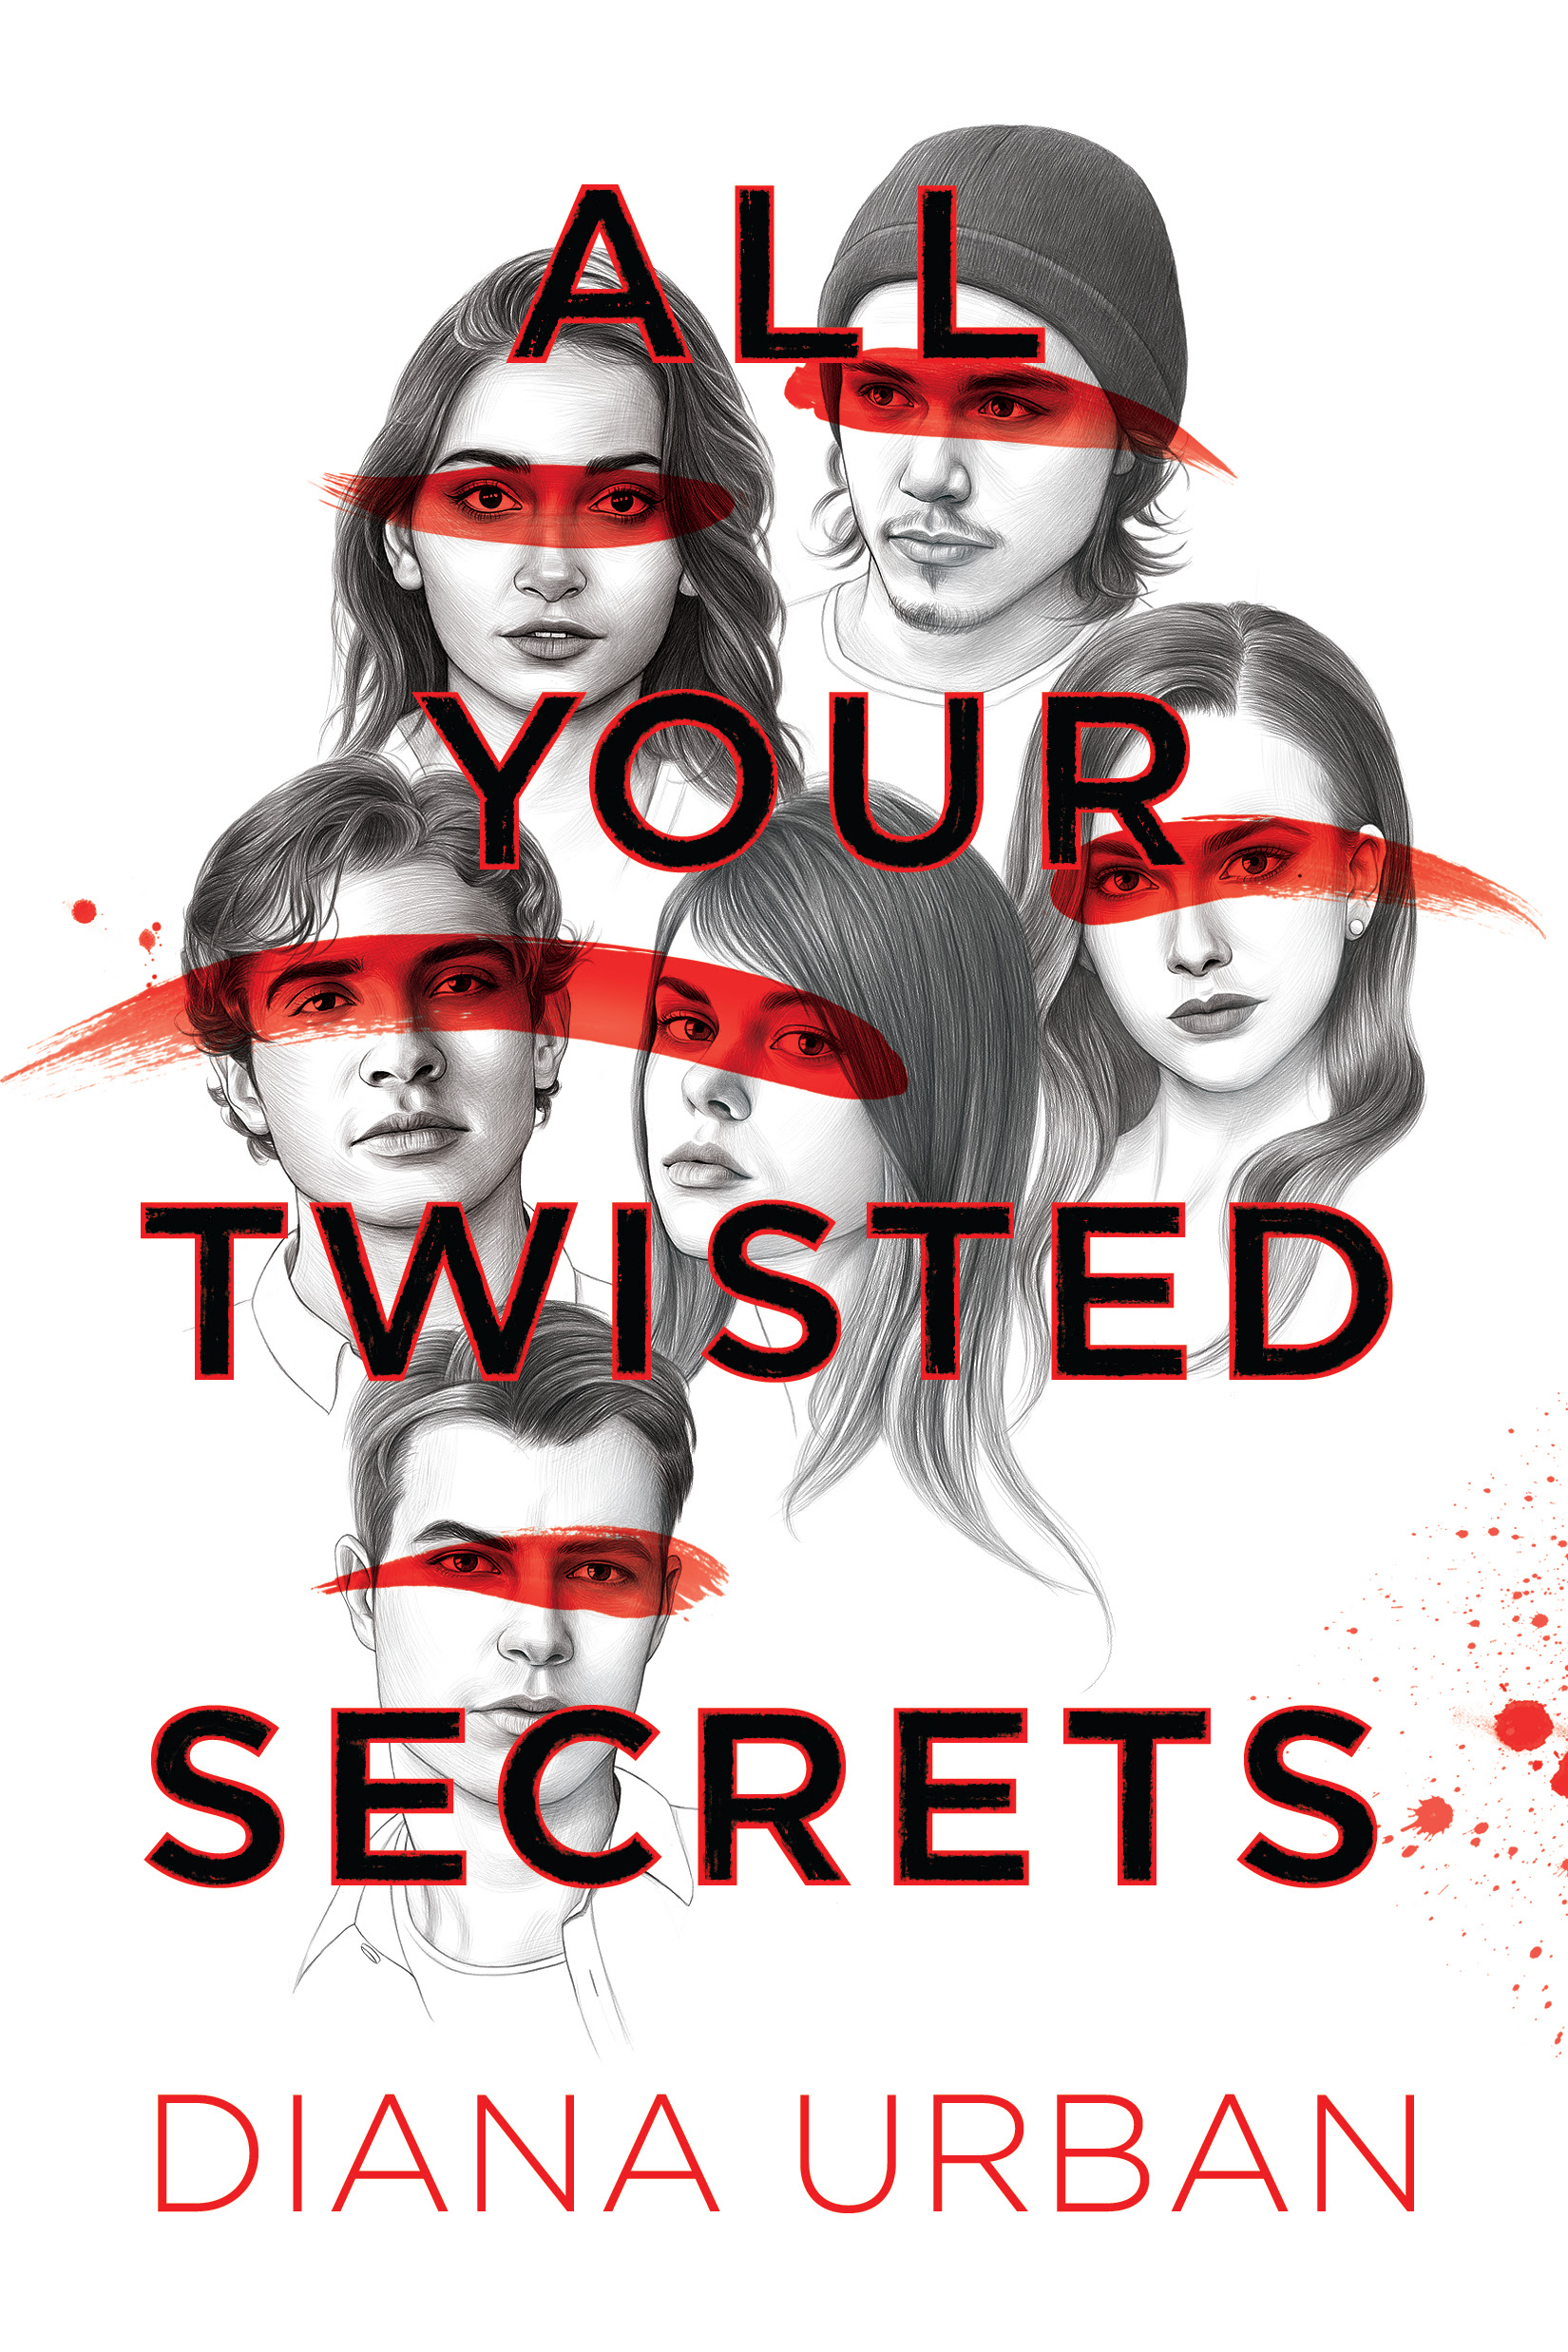 pdf download All Your Twisted Secrets